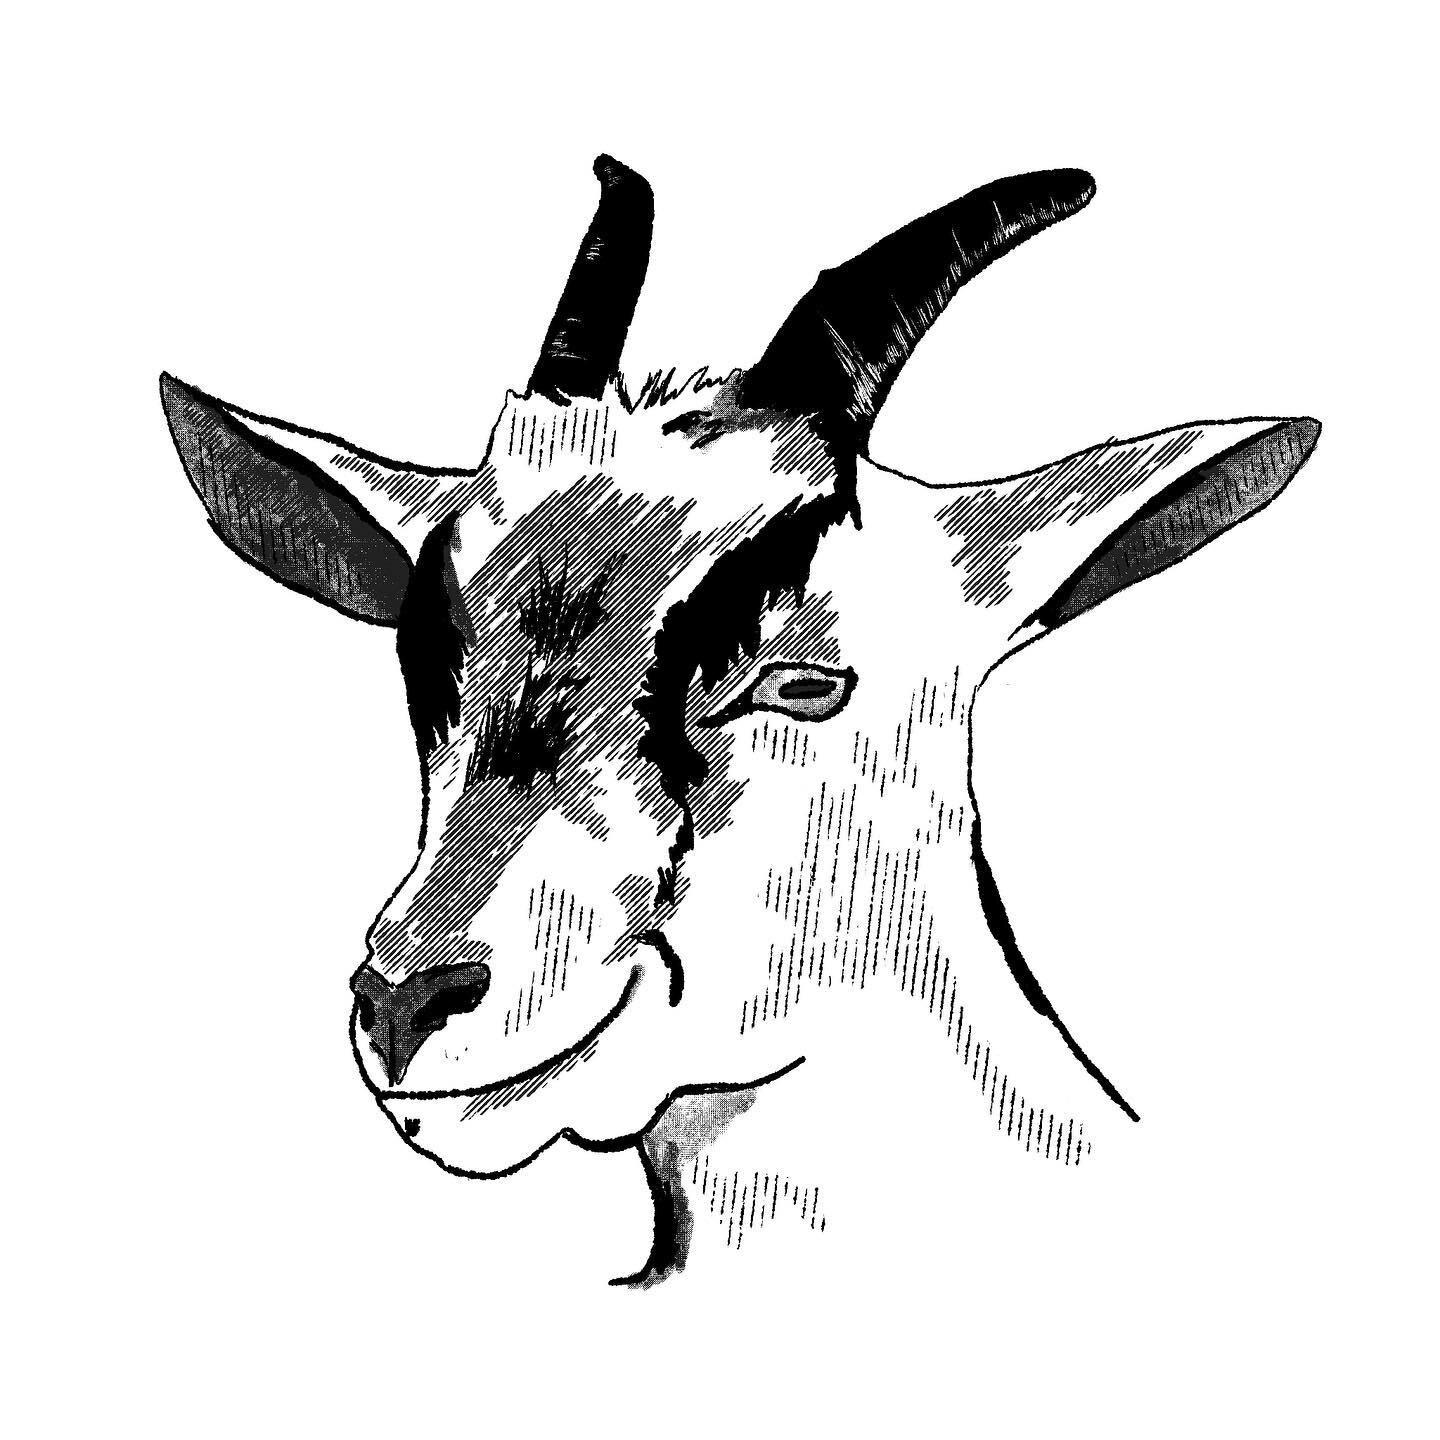 Not sure what to do with this thing, so if you have any ideas let me know. #design #goats #help